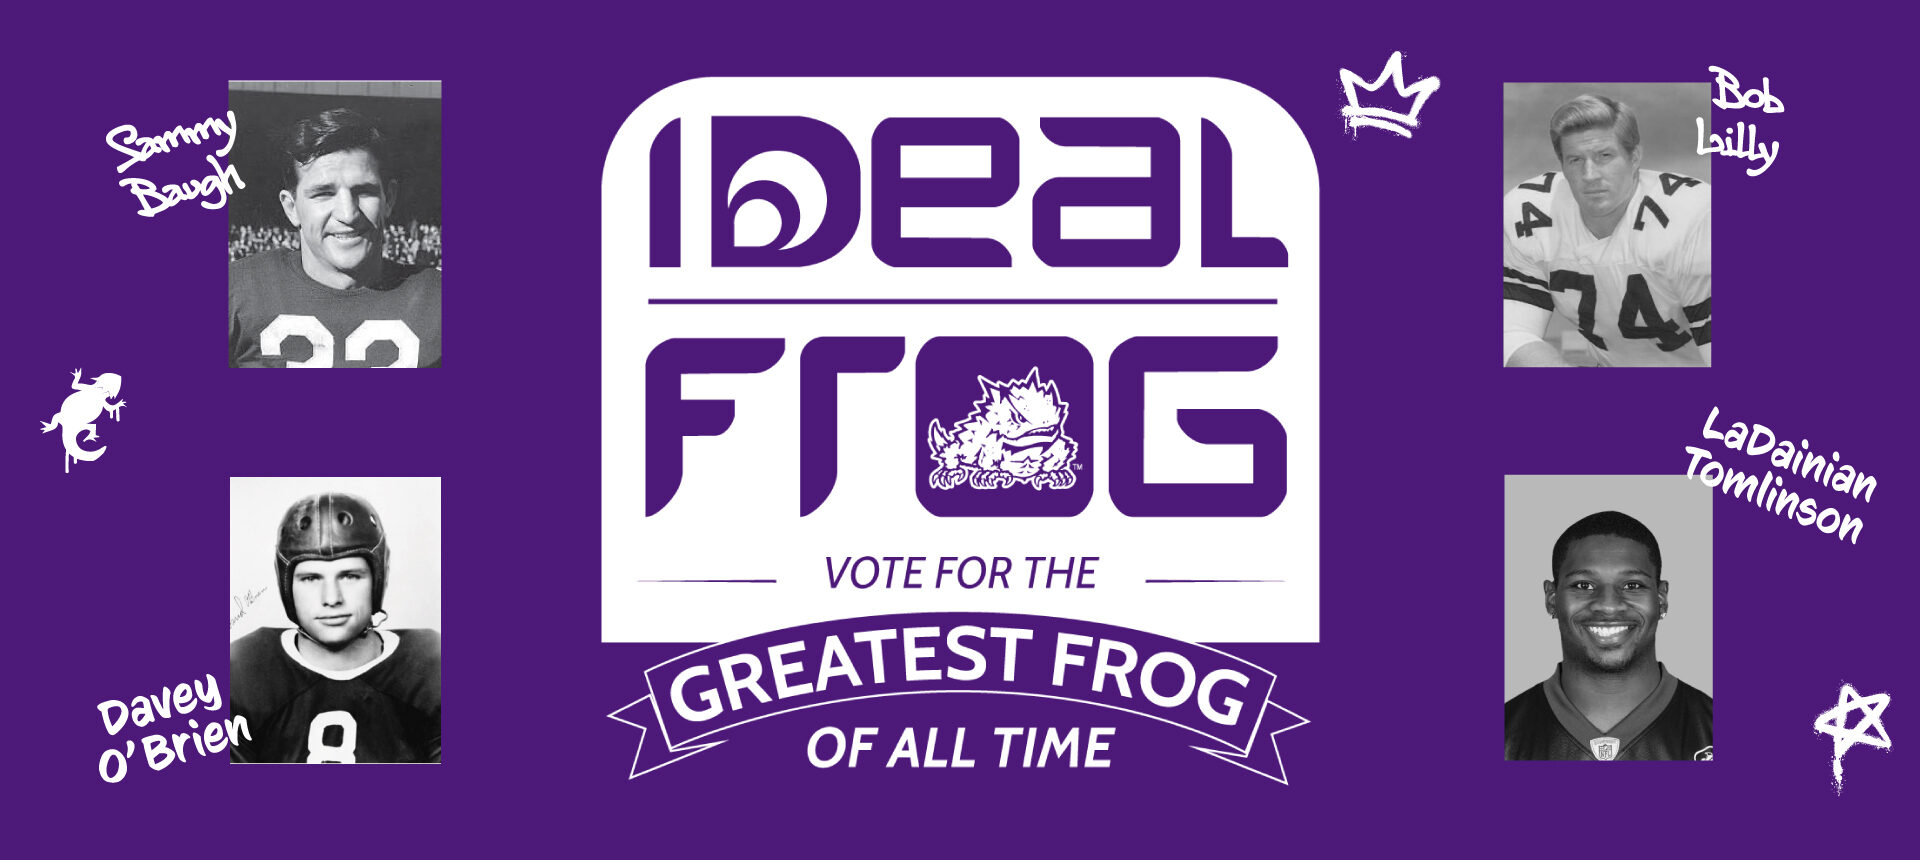 Logo of Ideal Frog Campaign in the center with Sammy Baugh and Davey O'Brien's images on the left side of the logo and Bob Lilly and LaDainian Tomlinson on the right side of the logo